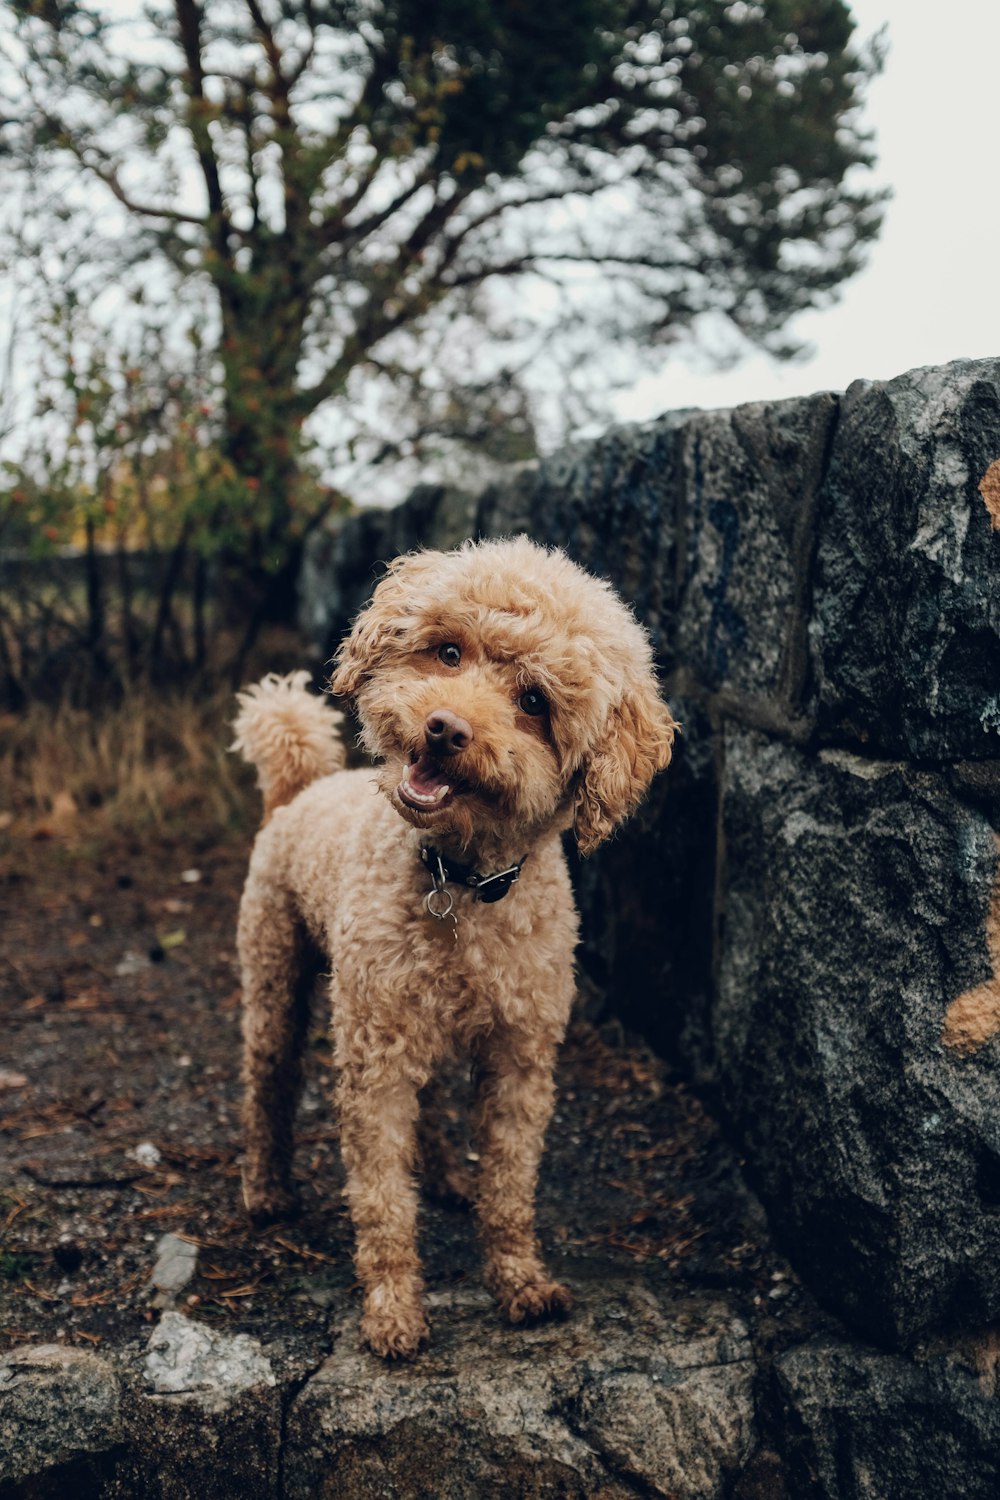 Are Hypoallergenic Dogs Less Sensitive To Allergensives?